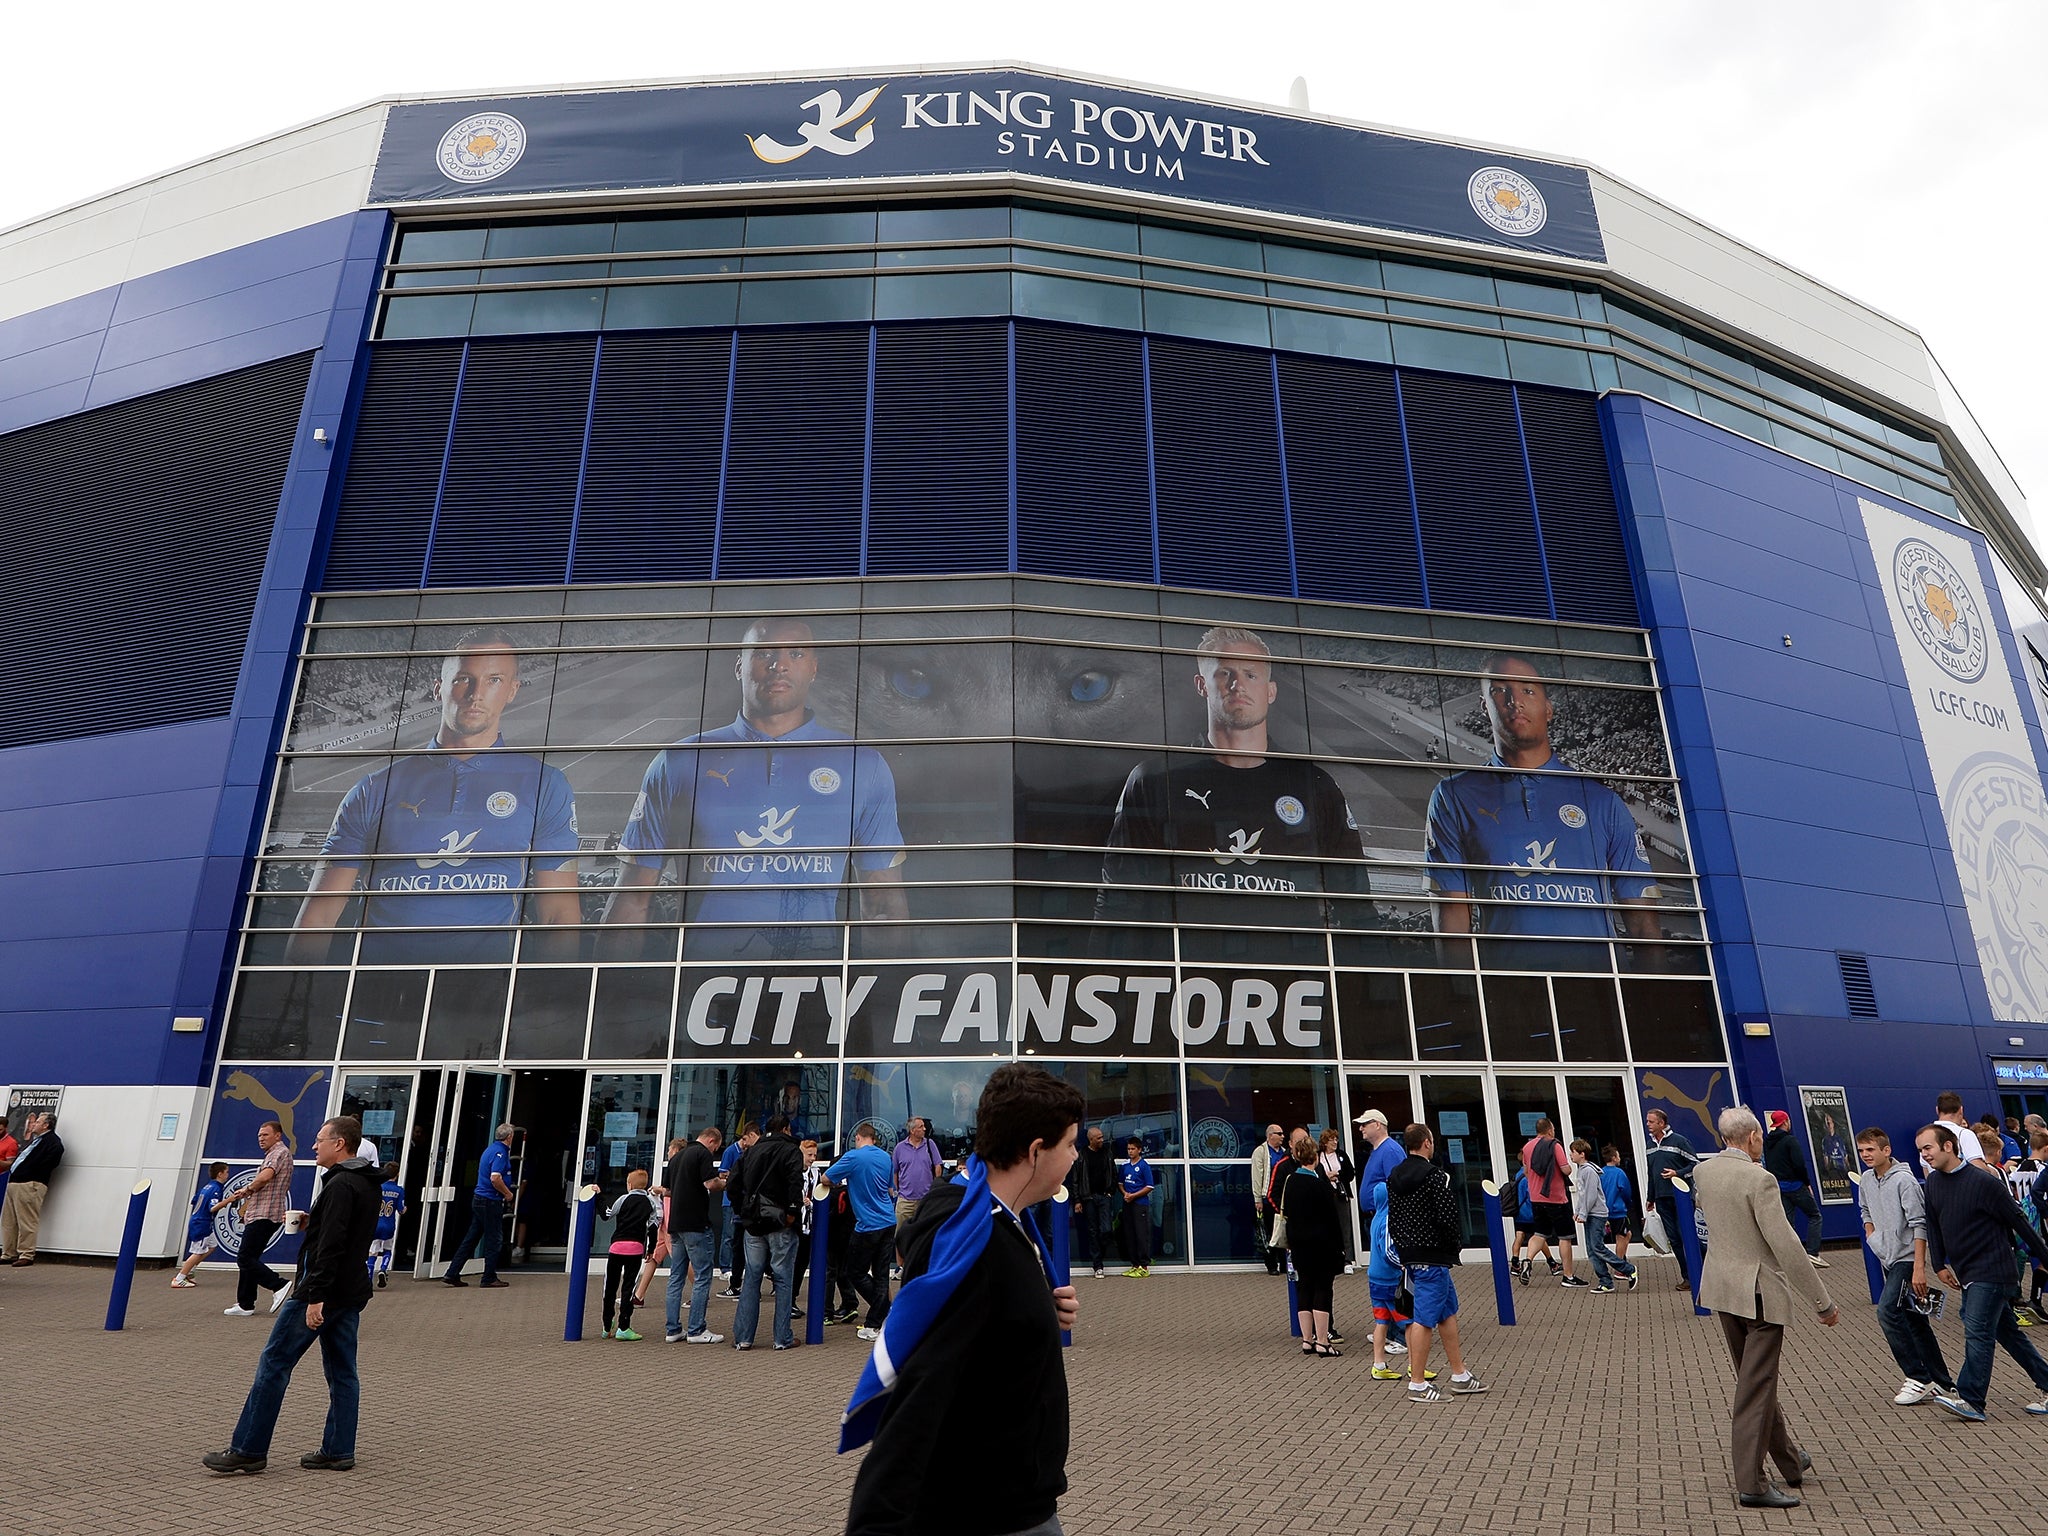 A view of the King Power Stadium